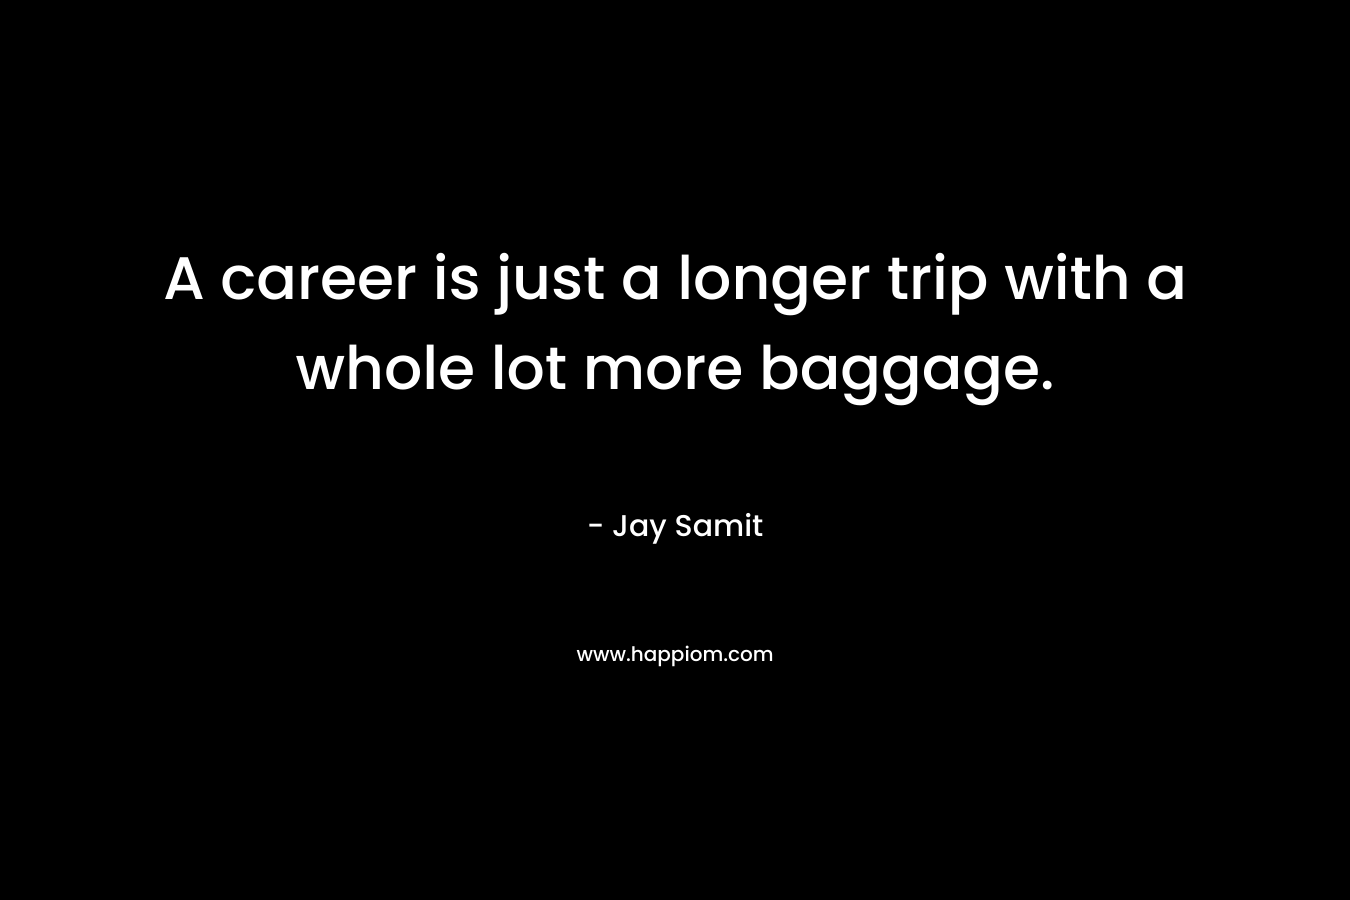 A career is just a longer trip with a whole lot more baggage.